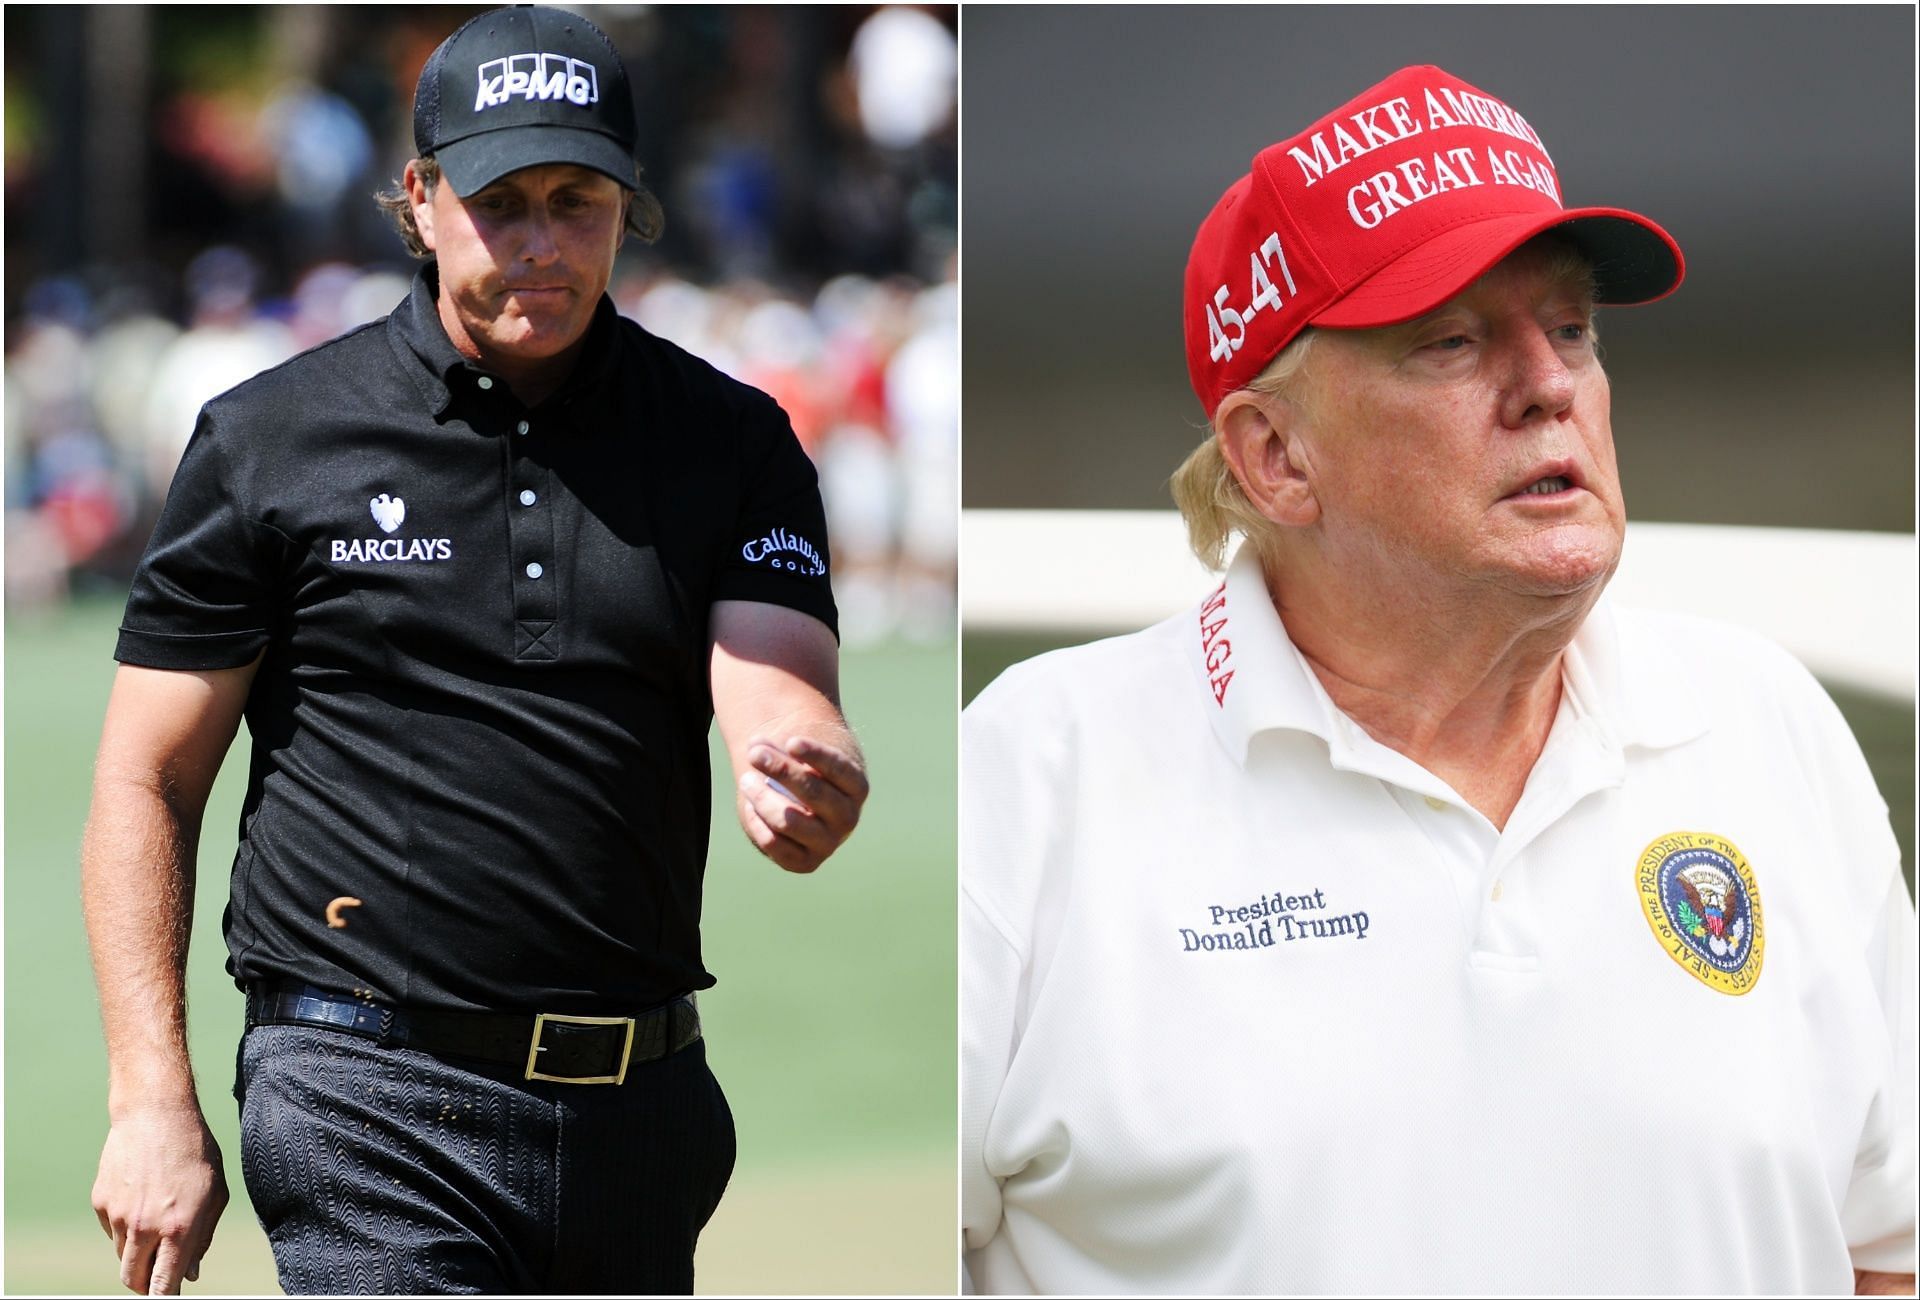 Phil Mickelson and Donald Trump (via Getty Images)